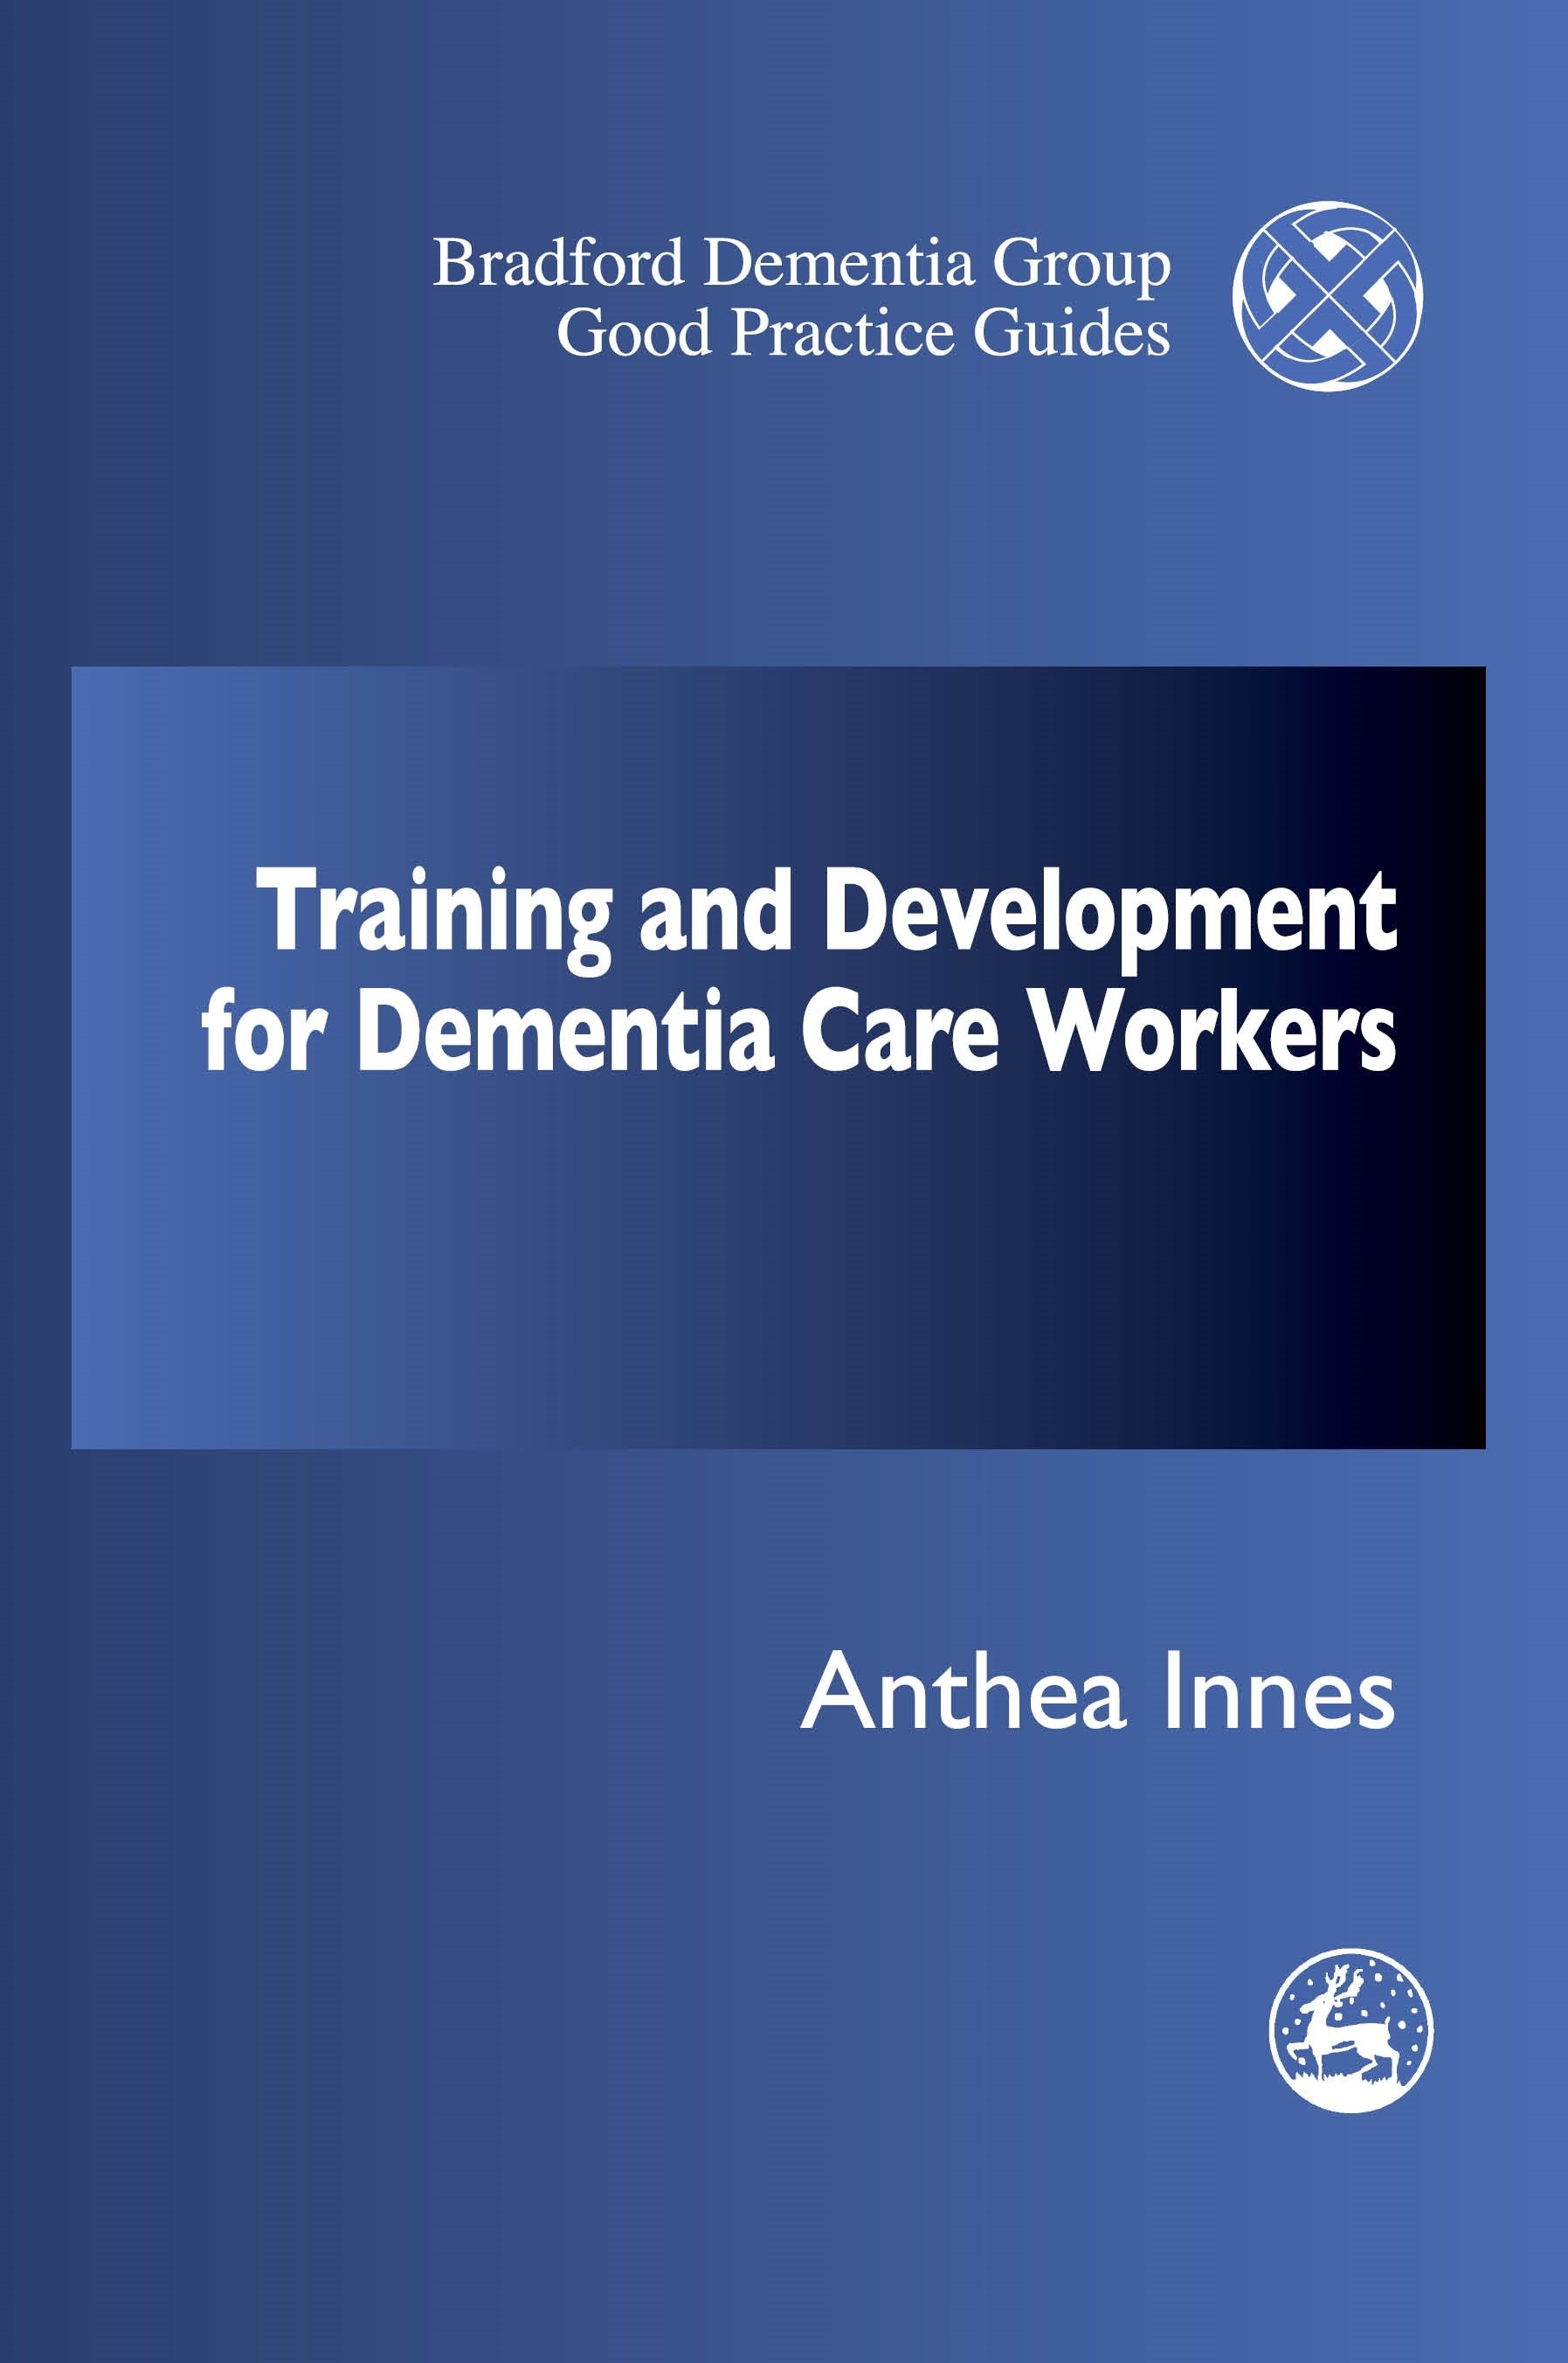 Training and Development for Dementia Care Workers by Anthea Innes